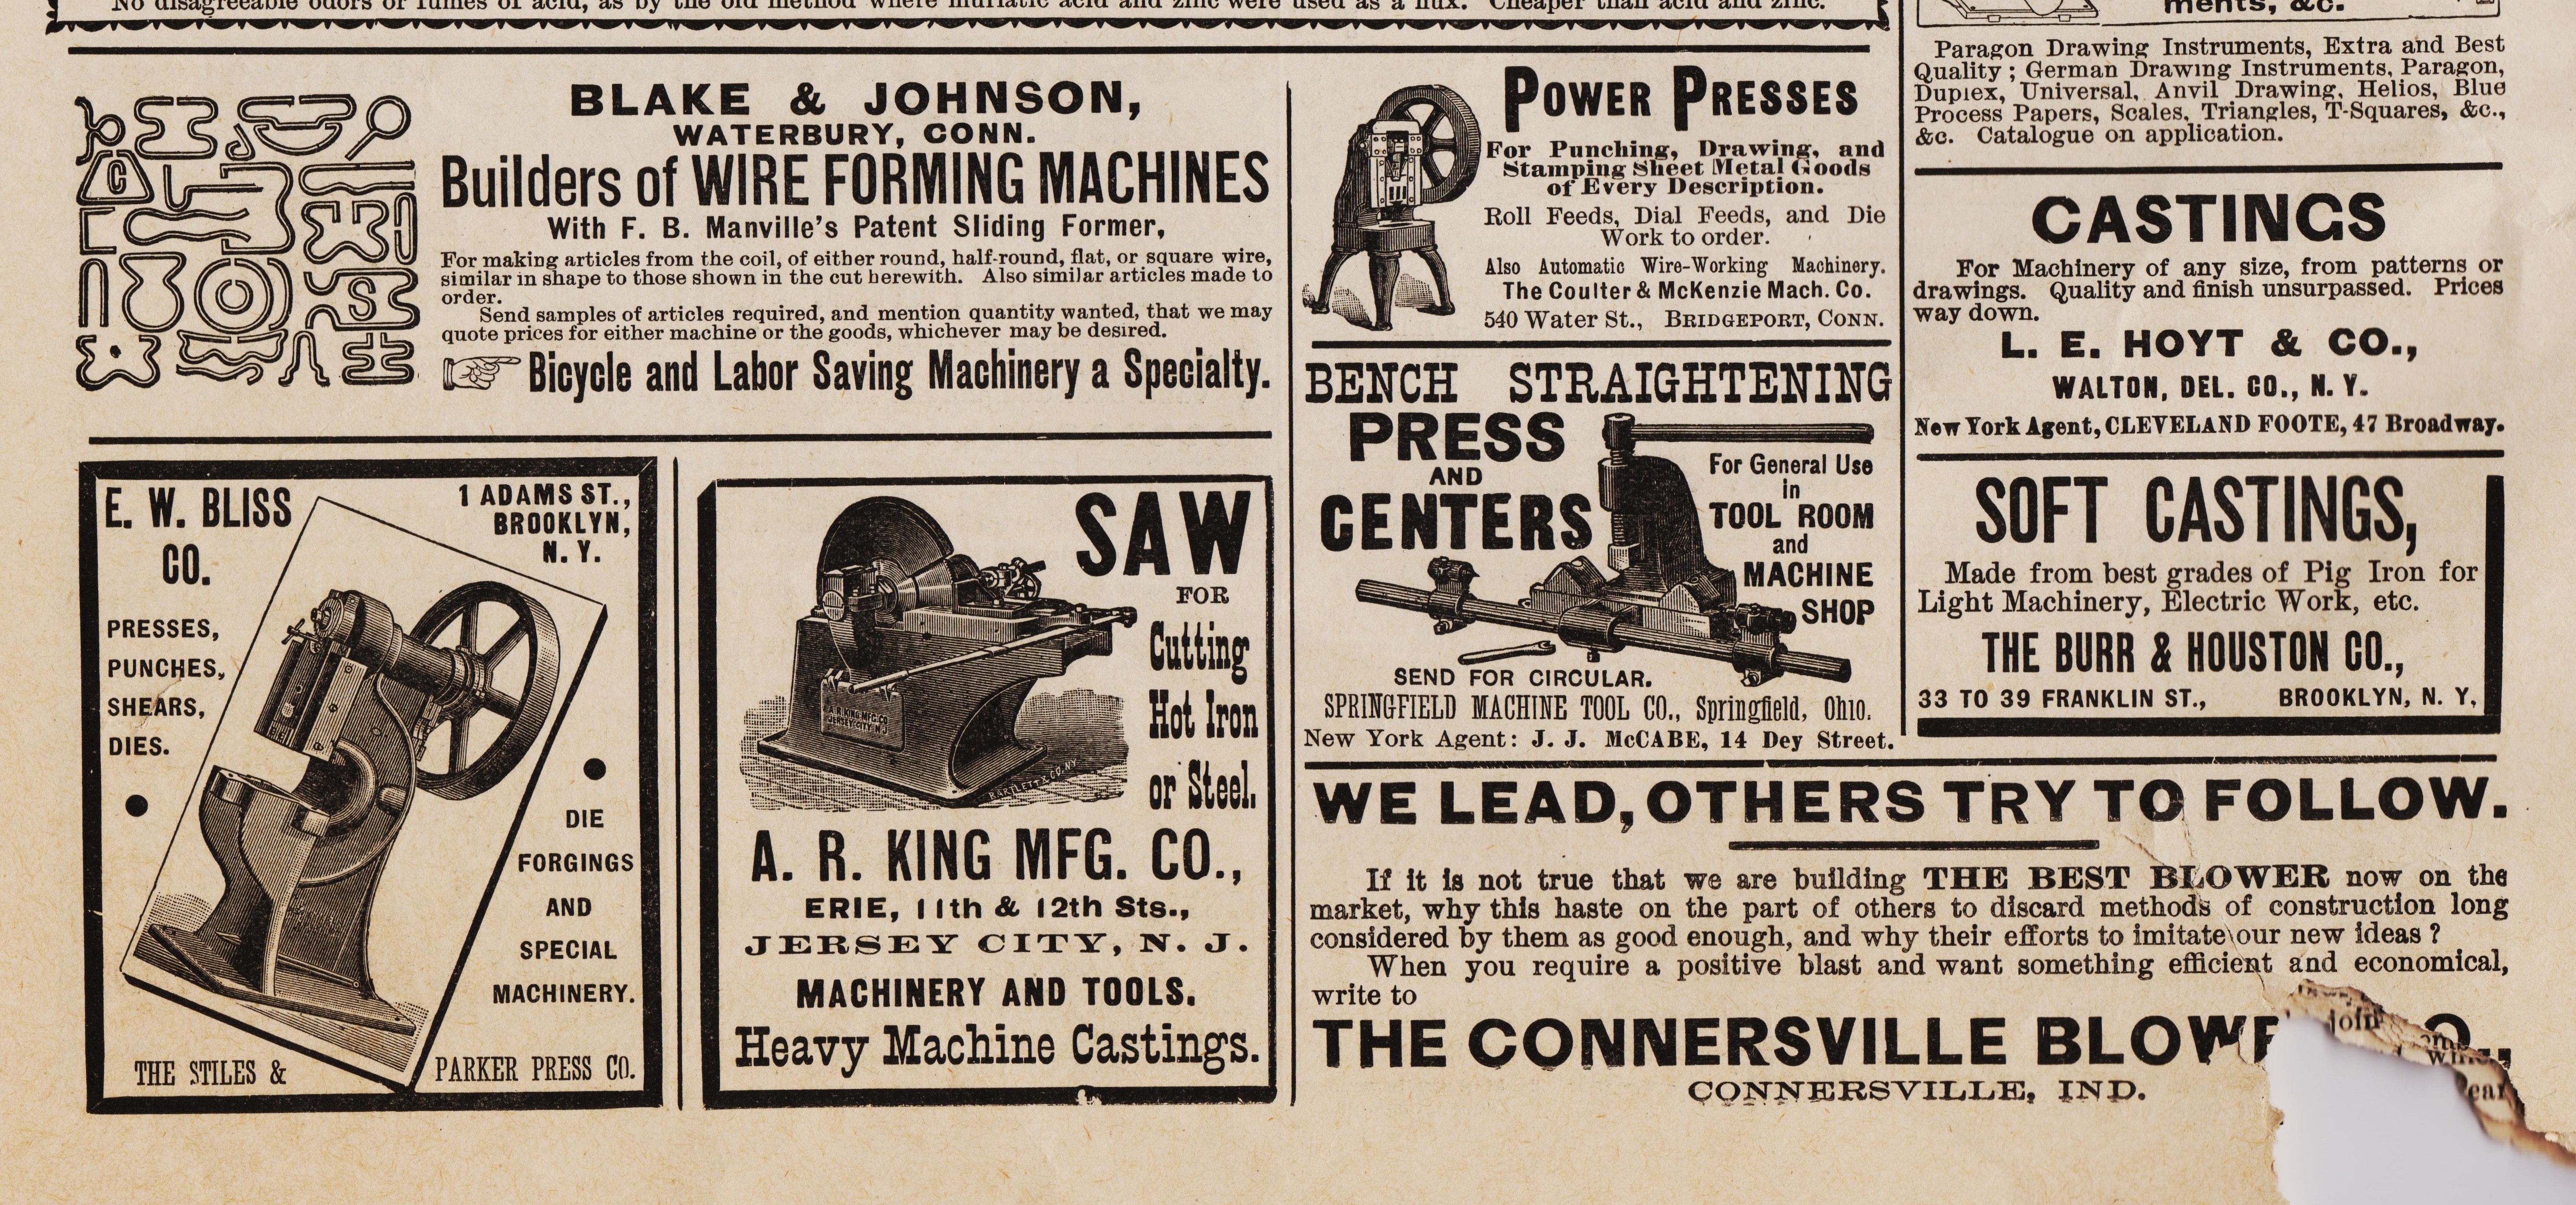 https://antiquemachinery.com/images-2020/American_Machinist-March-15-1894-pg-13-bot-Ads.jpg